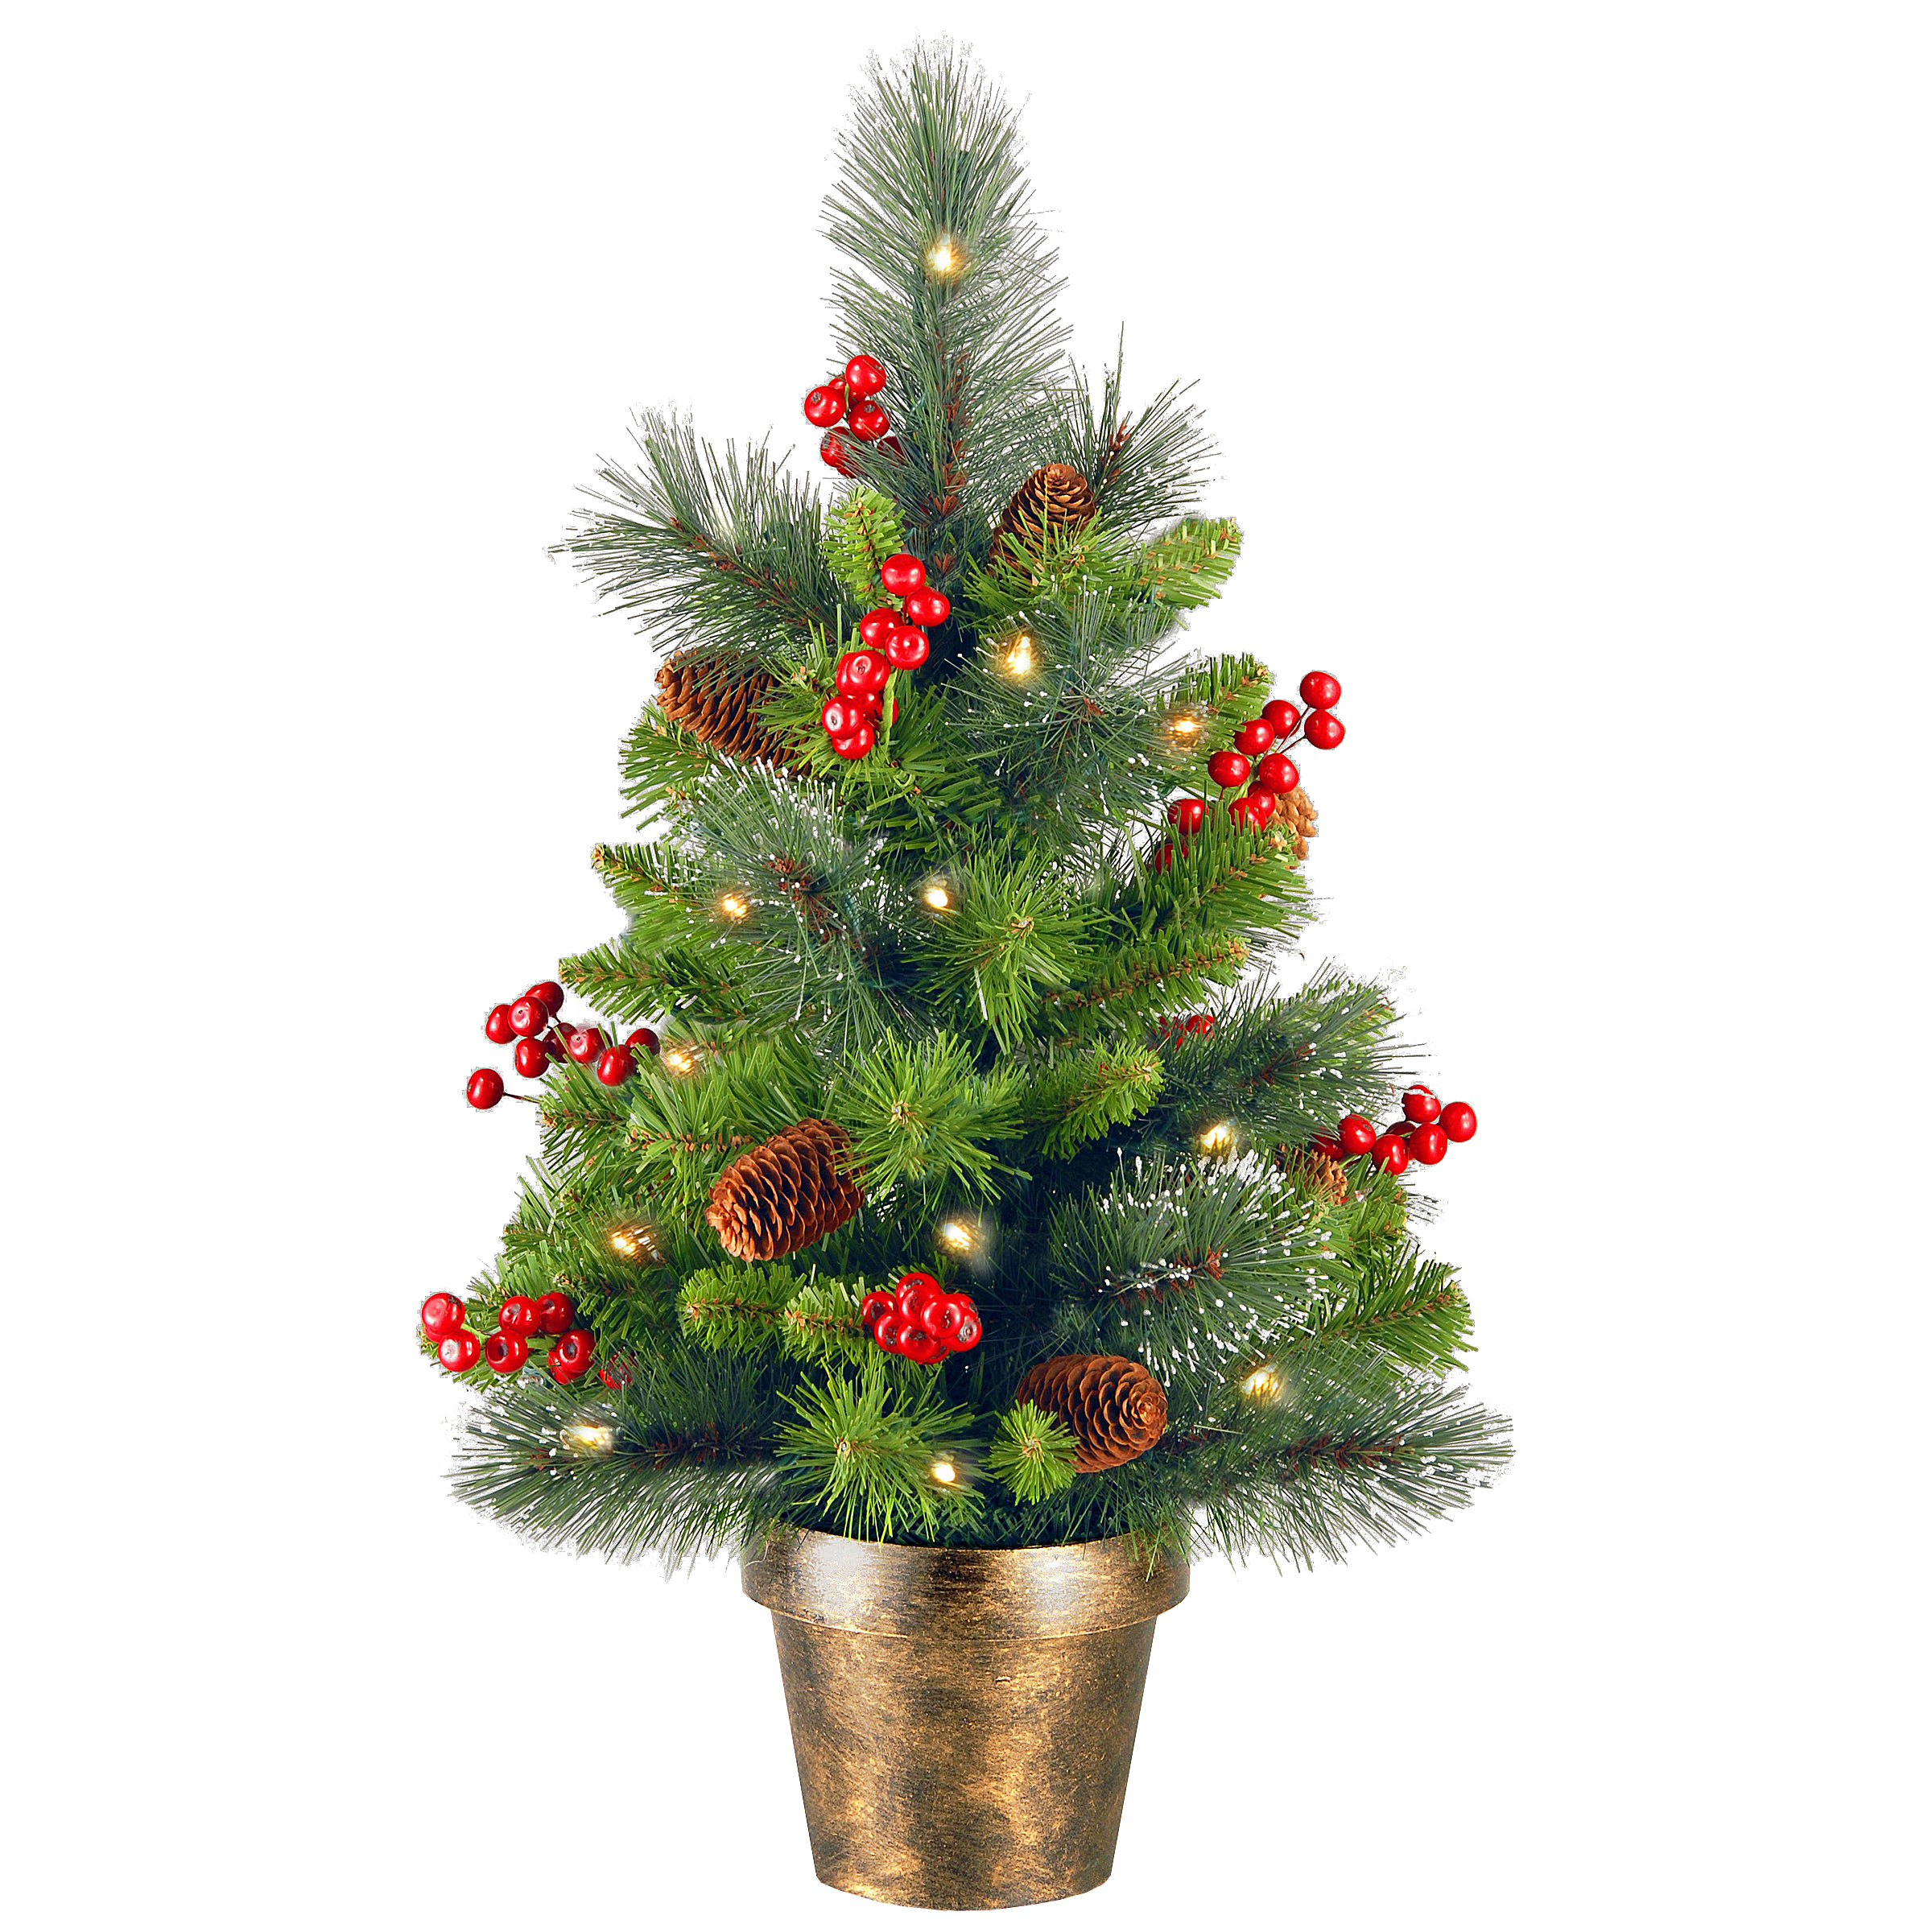 National Tree Company Pre-Lit Artificial Mini Christmas Tree, Green, Crestwood Spruce, White Lights, Decorated with Pine Cones, Berry Clusters, Frosted Branches, Includes Pot Base, 2 Feet - image 1 of 5